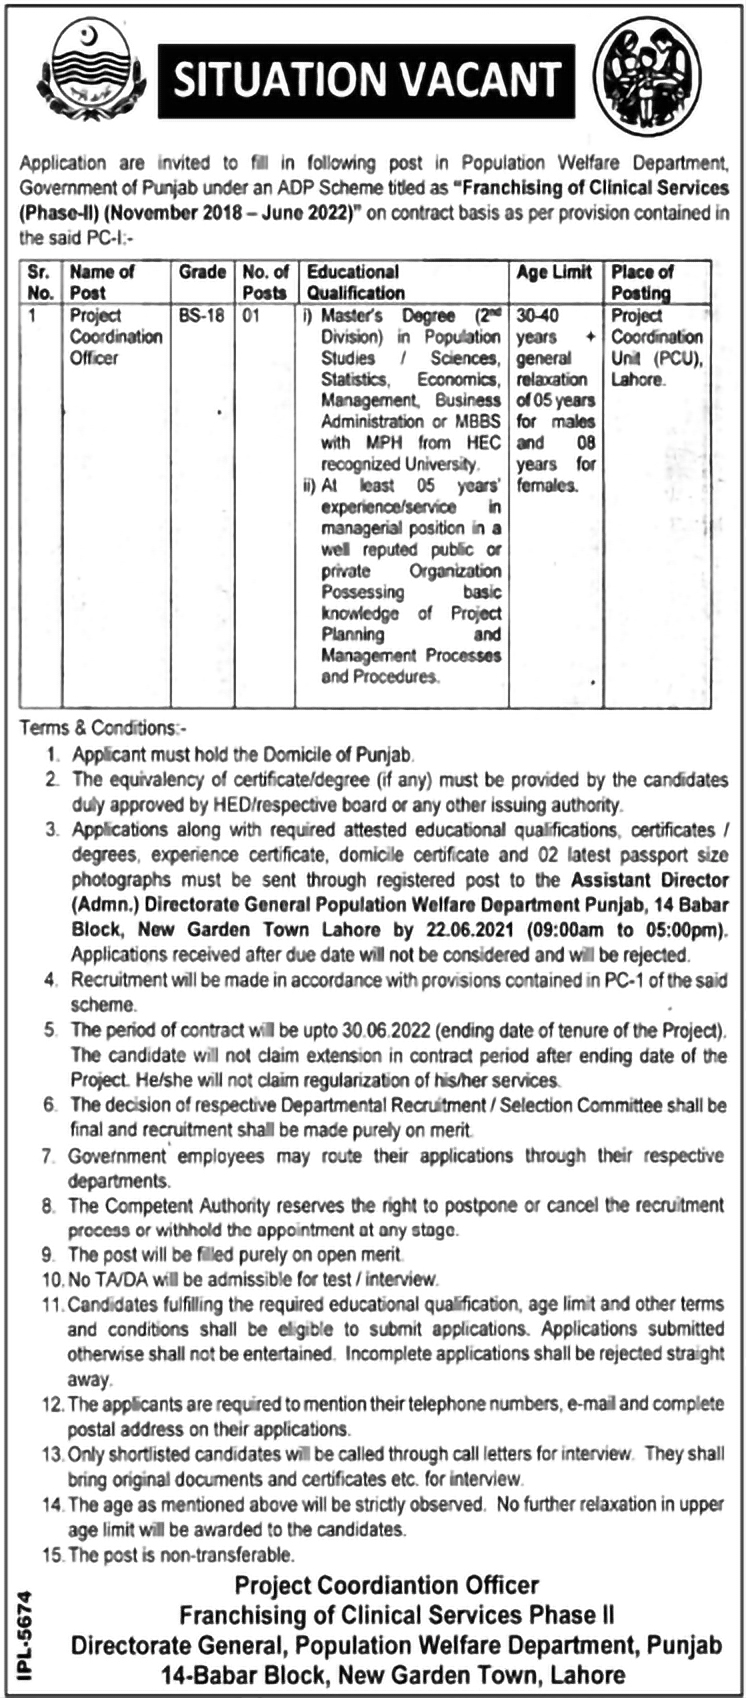 Project Coordination Officer Jobs in Population Welfare Department Govt of Punjab in Lahore.